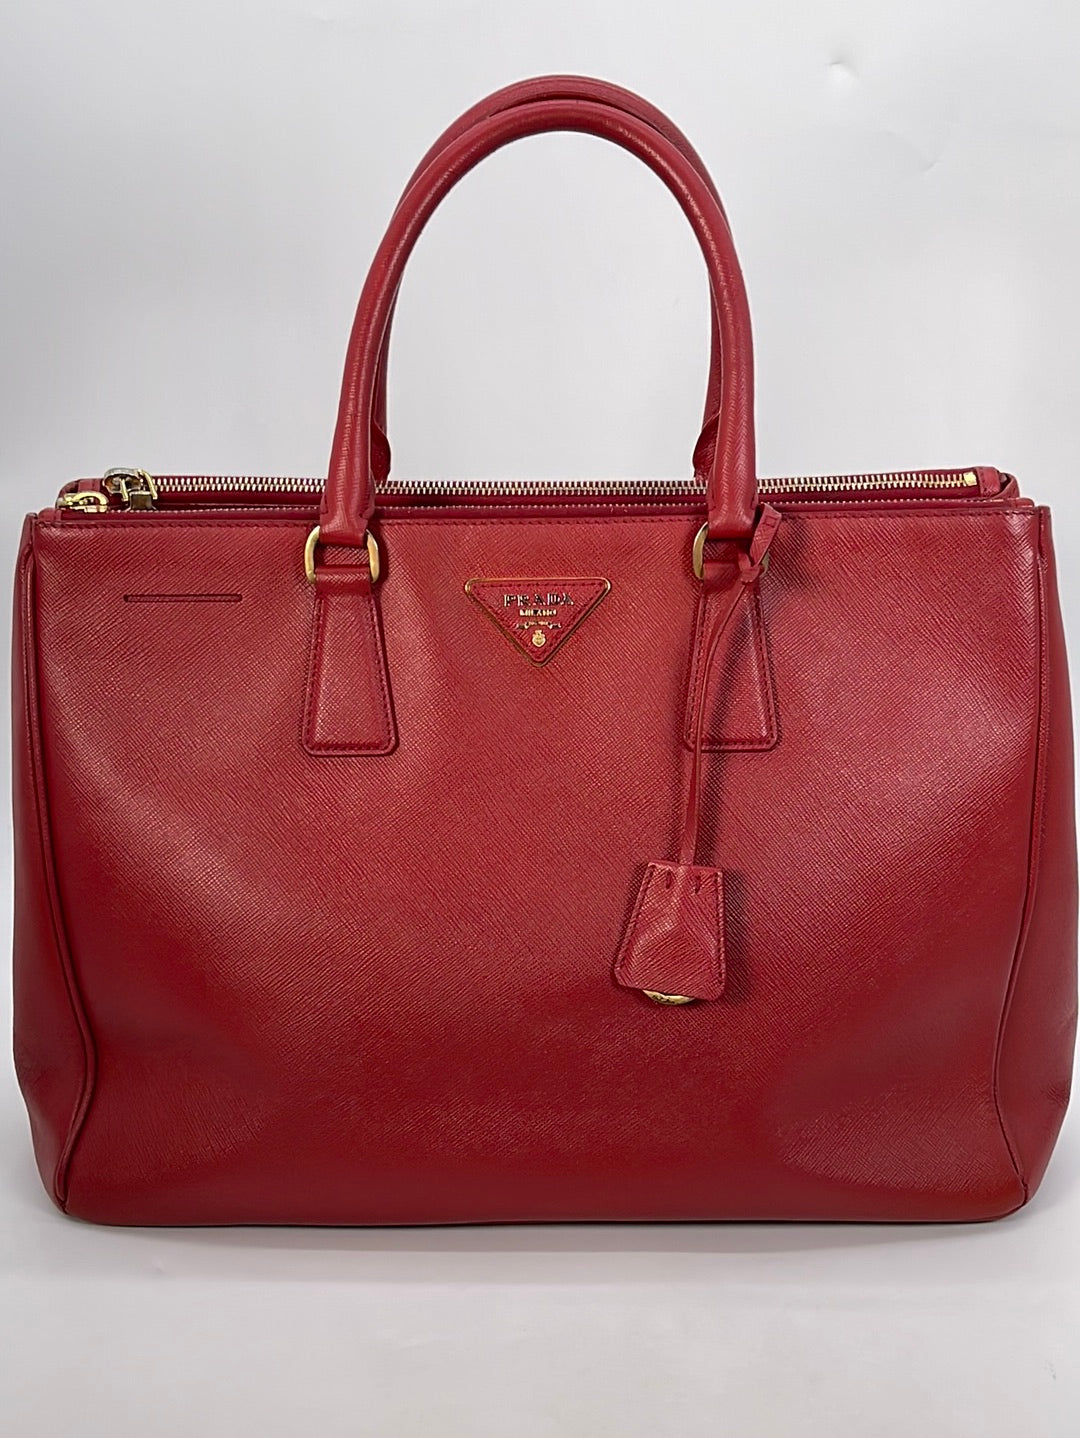 Preloved Prada Red Saffiano Leather Double Zip Tote Bag 7 030223